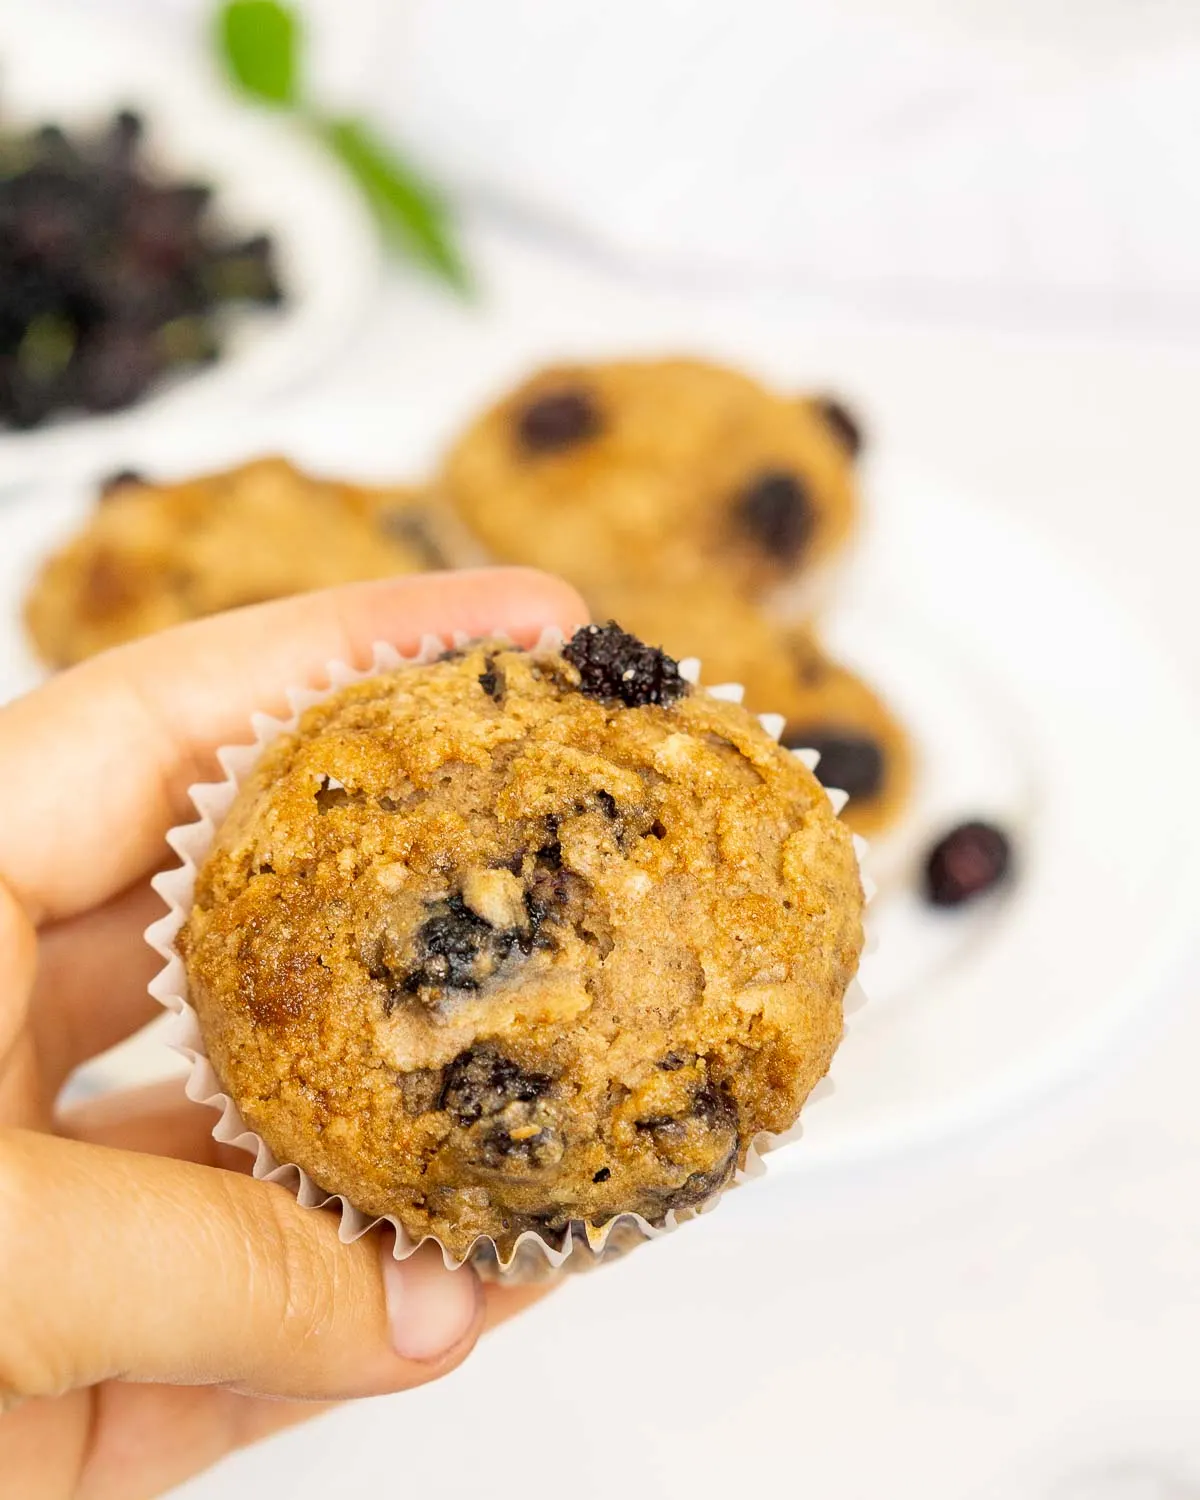 Hand holding mulberry muffin with brown sugar topping